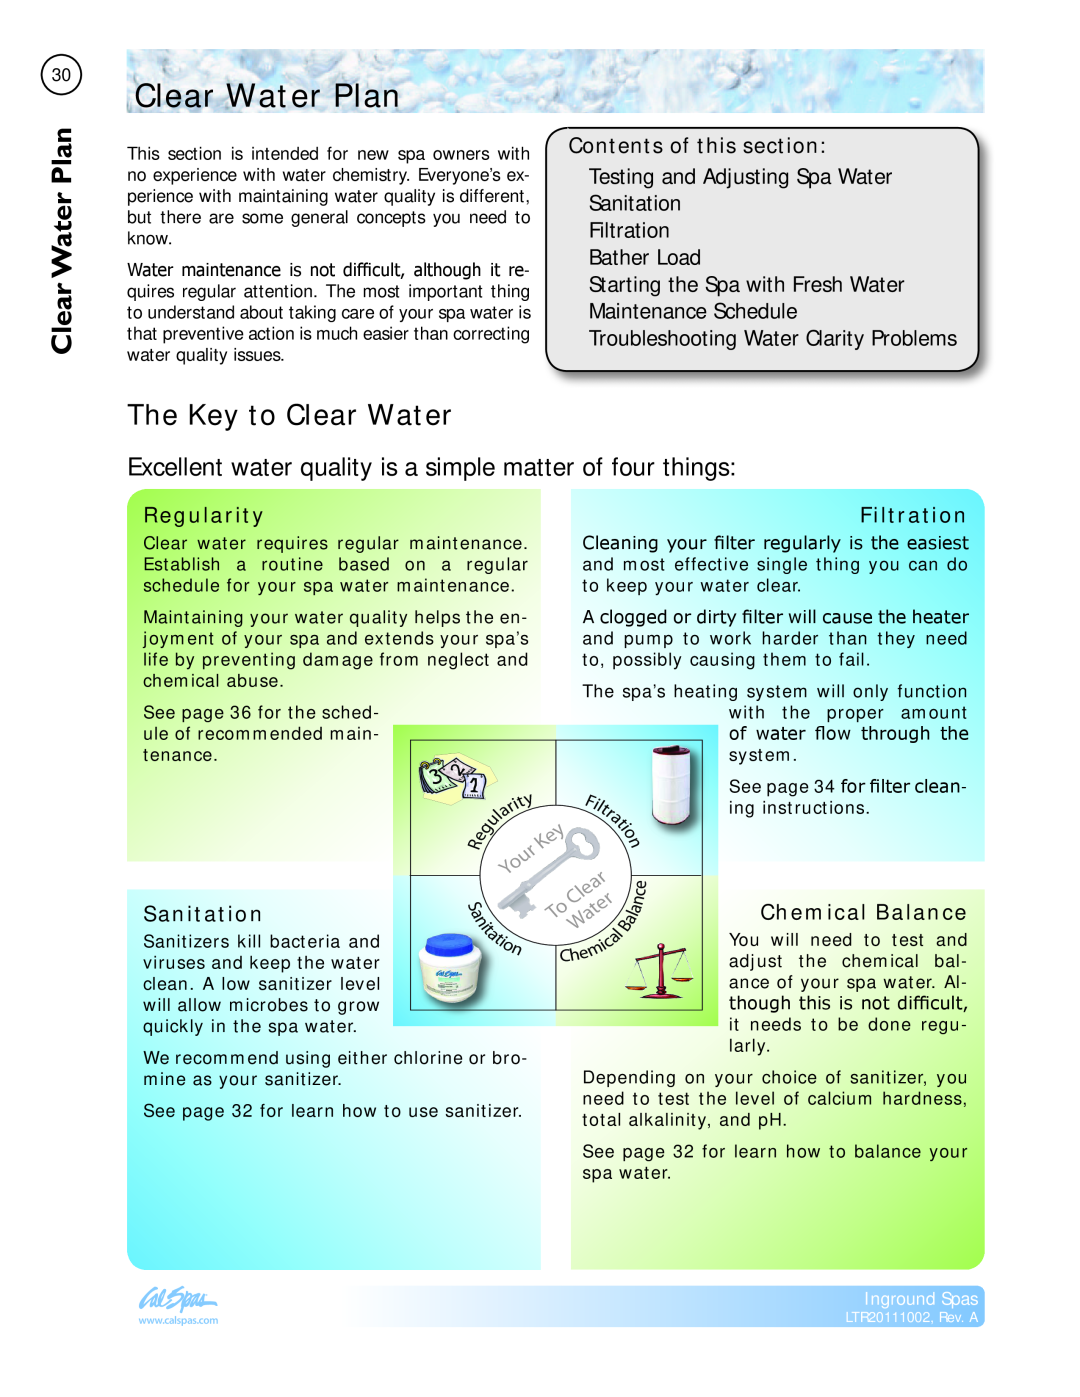 Cal Spas LTR20111002 manual Clear Water Plan, Clear PlanWater, The Key to Clear Water 